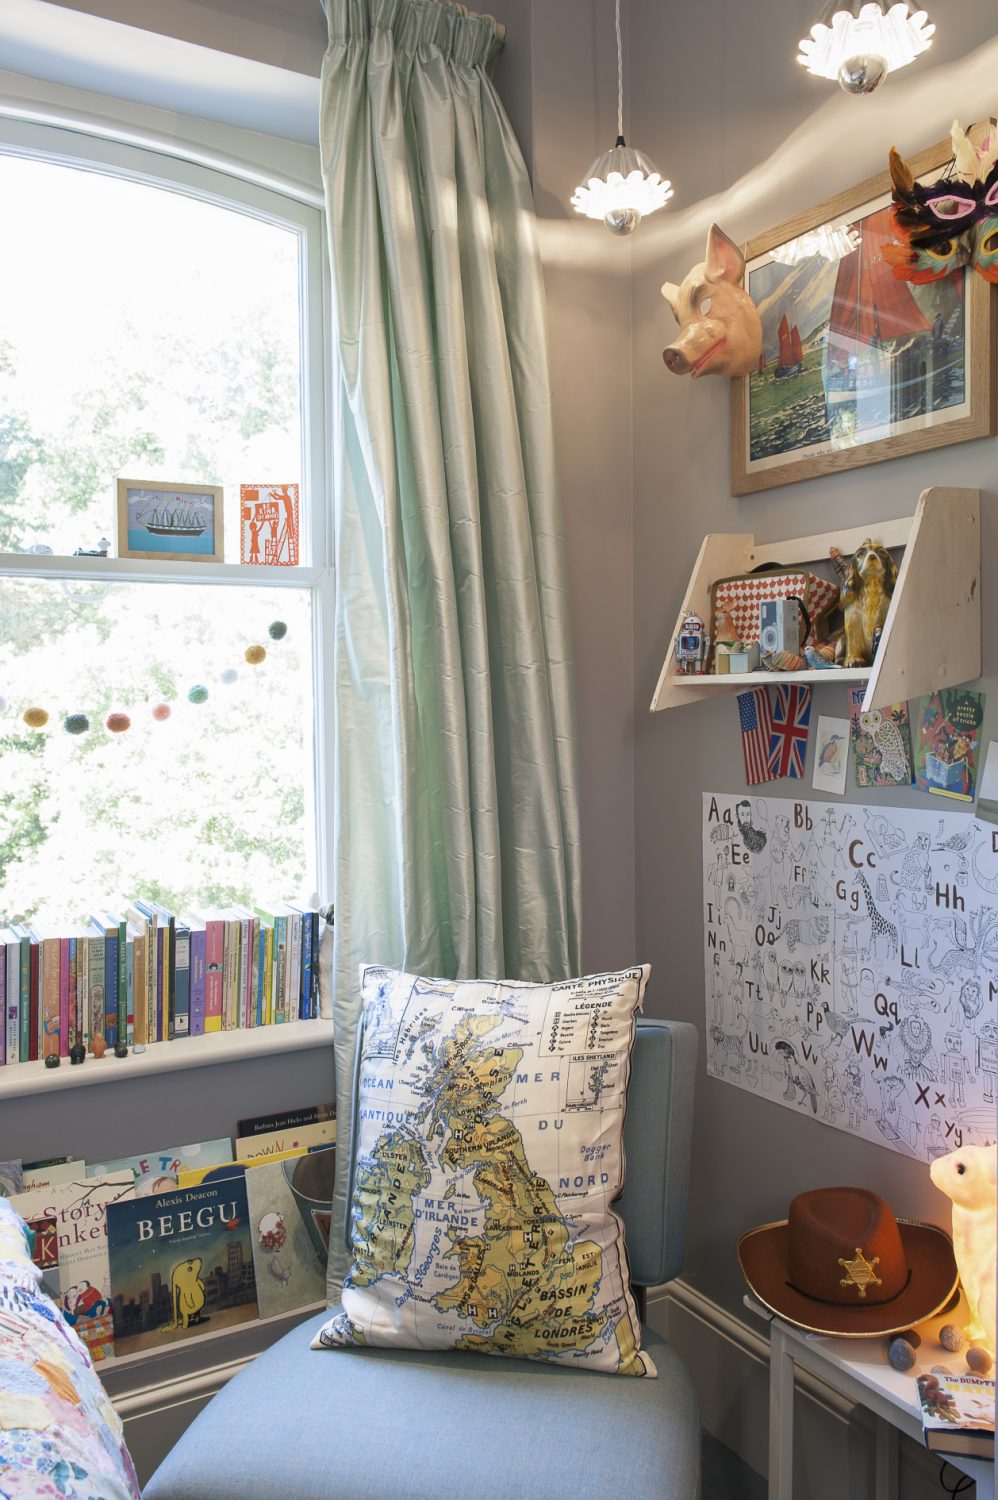 The couple’s children have obviously inherited their parents’ love of books and graphic art, too, because they all give books pride of place. In their youngest daughter’s room there is a little sea green bedroom chair with a silk cushion featuring a map of the British Isles, and a table with a milky white rabbit nightlight to banish the dark.